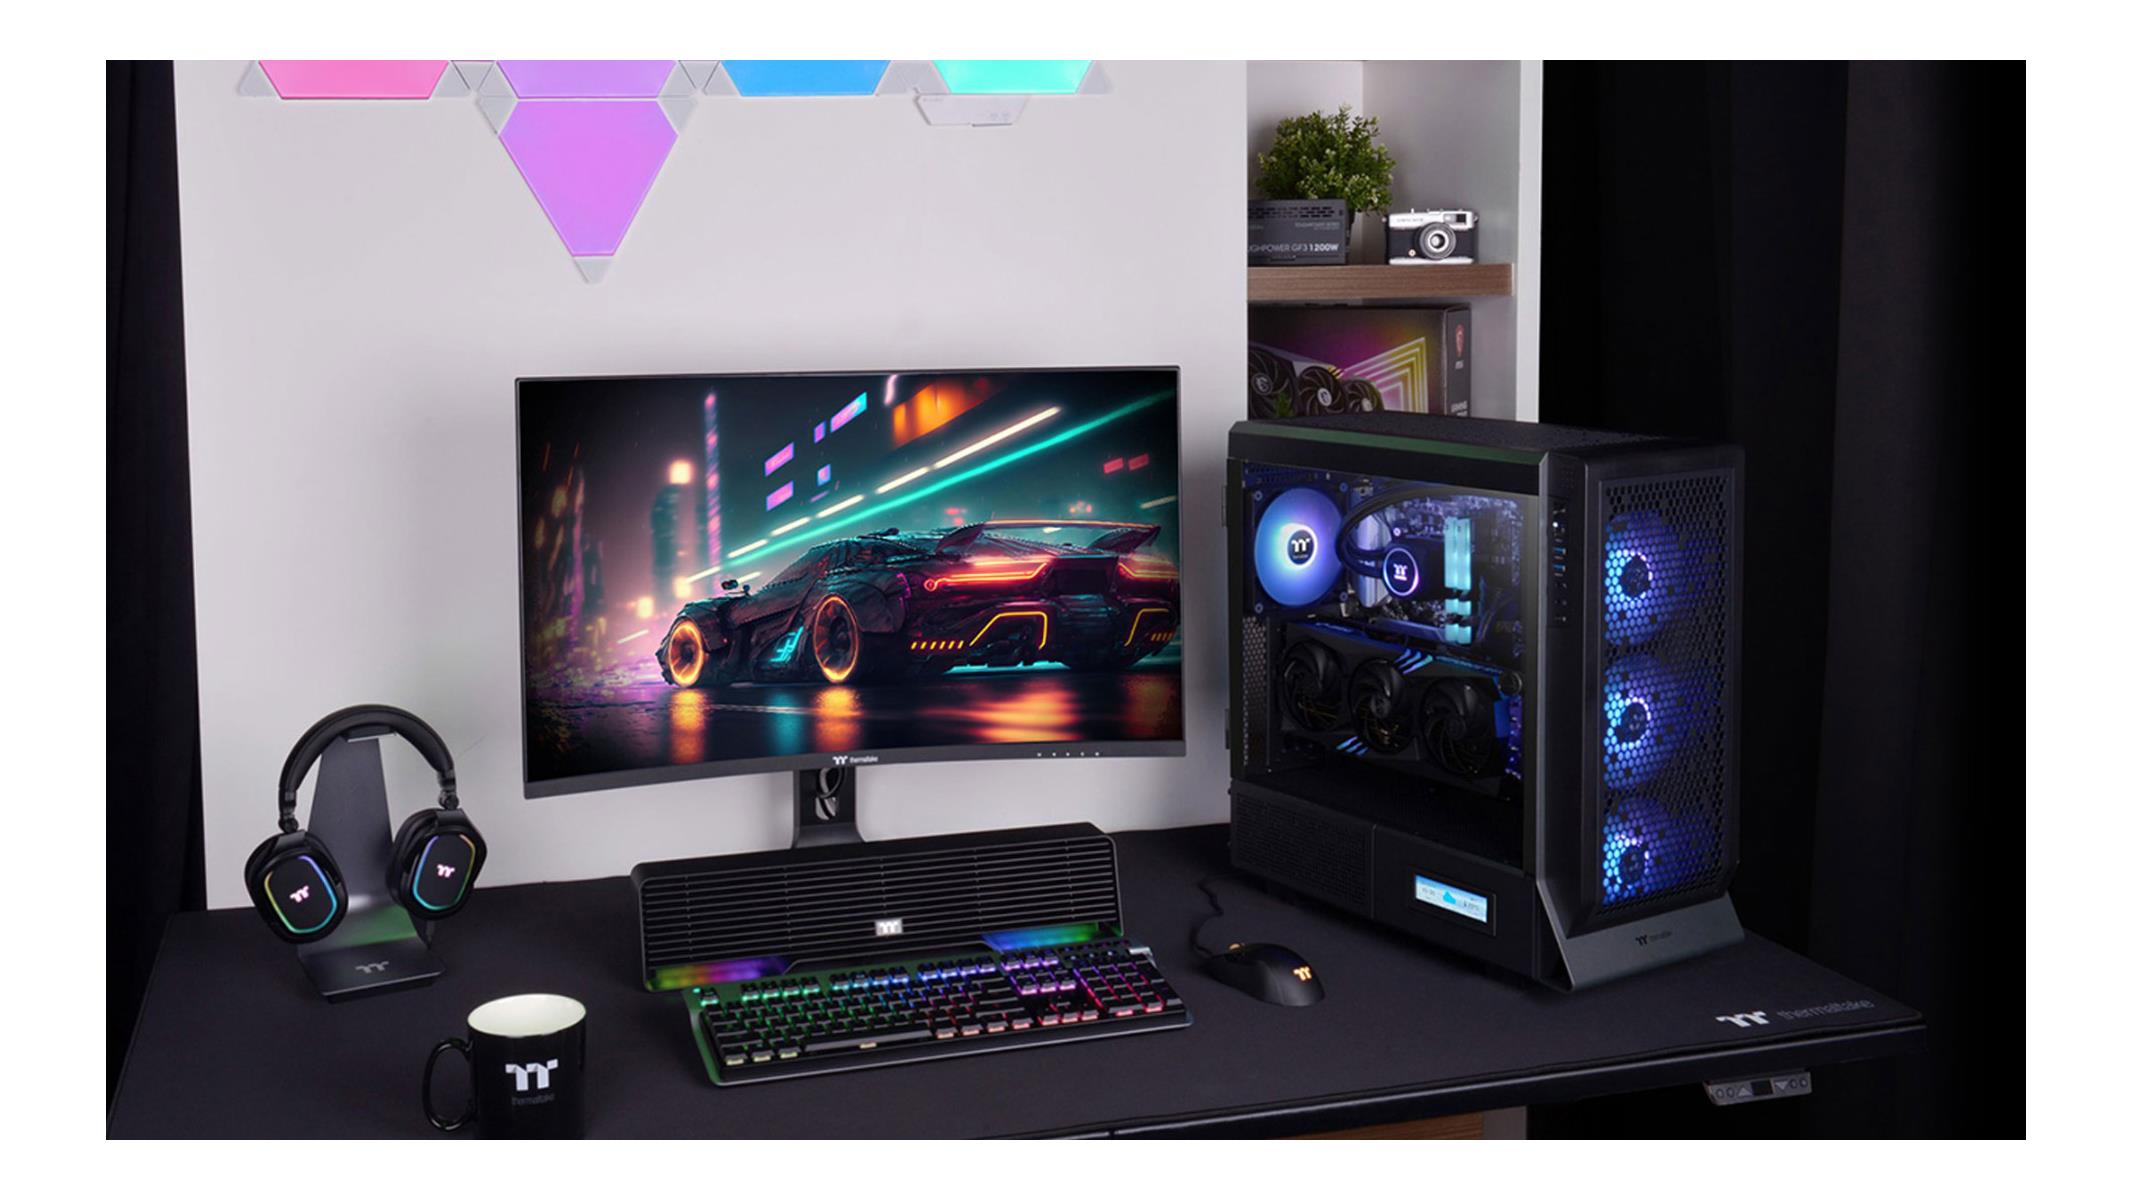 Thermaltake's First Gaming Monitors Feature Familiar 1440p